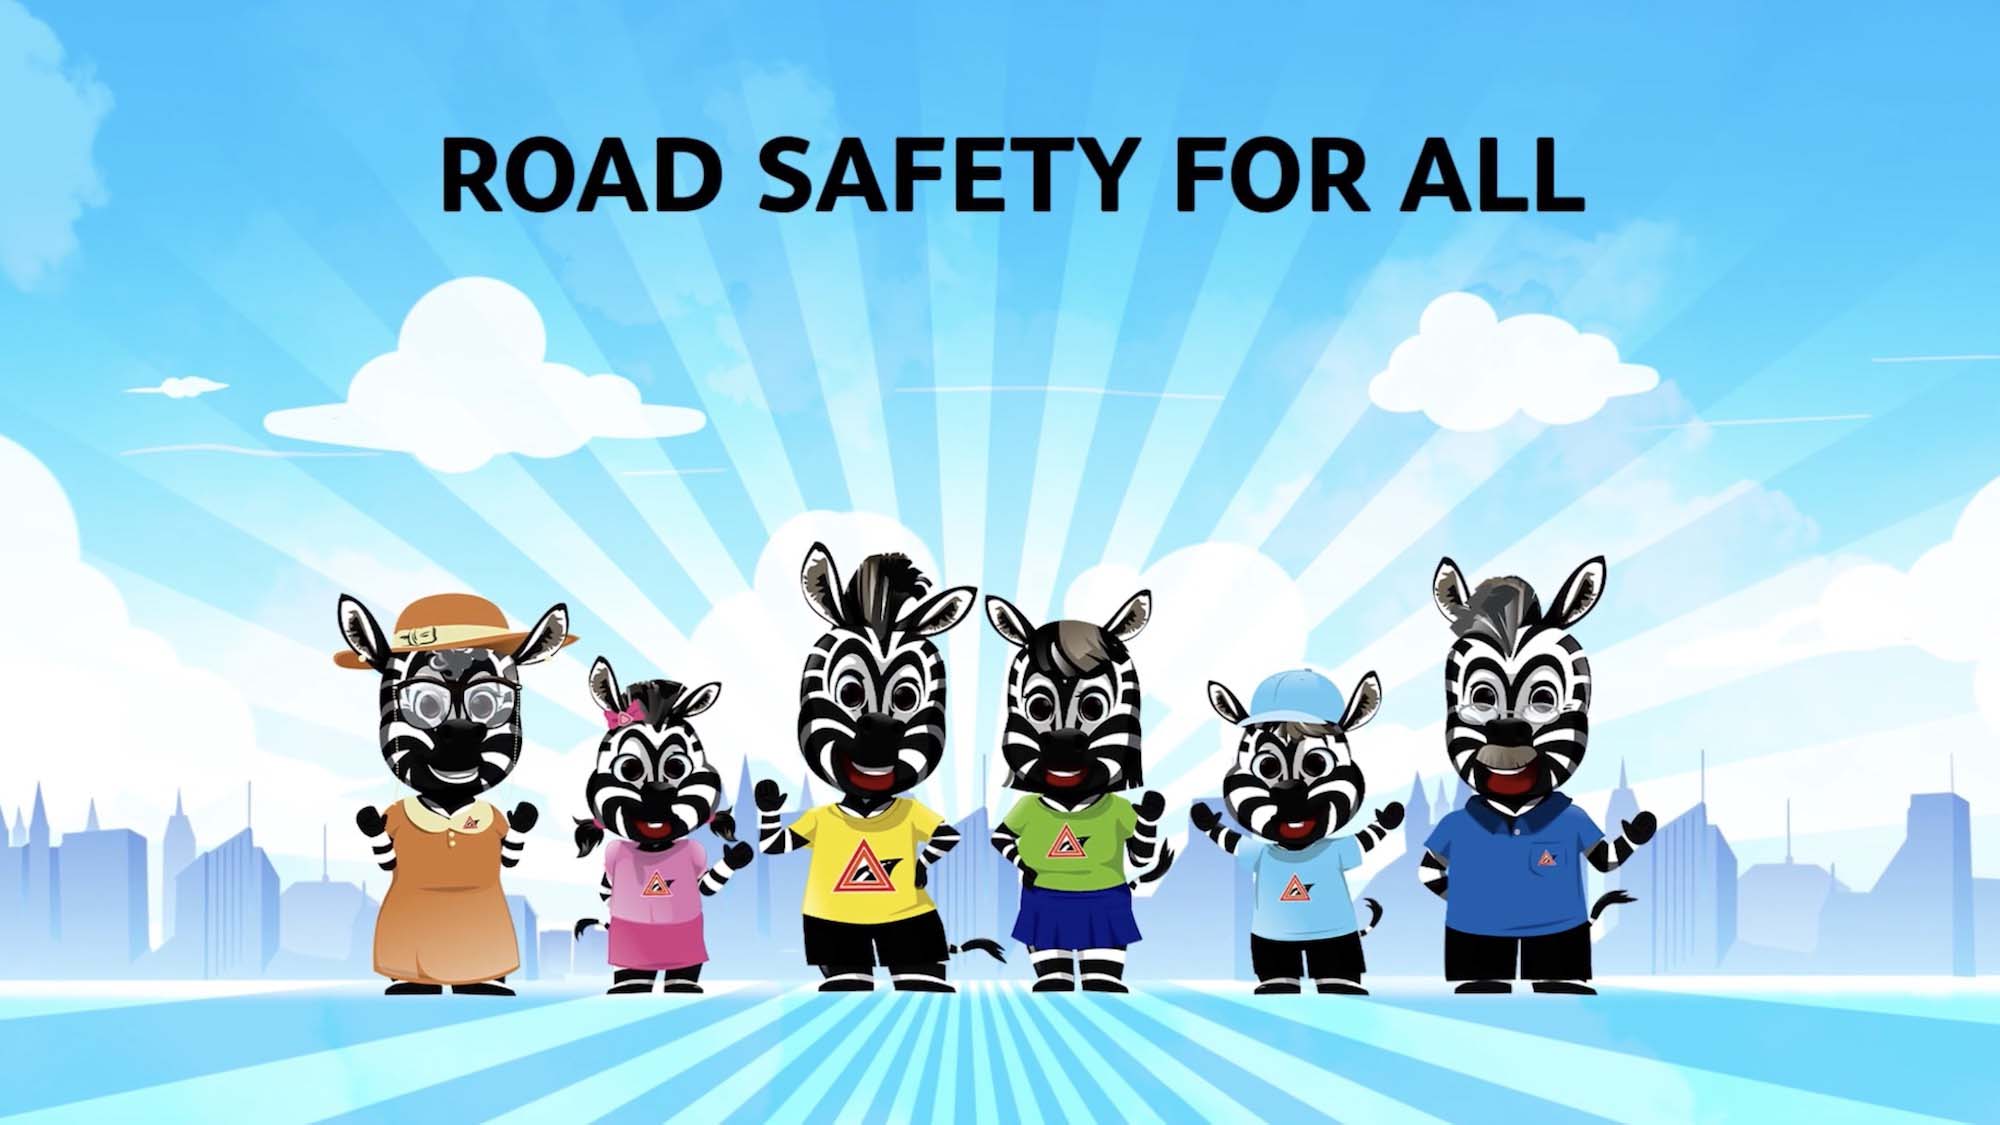 Singapore Road Safety Council 2021 Video Production